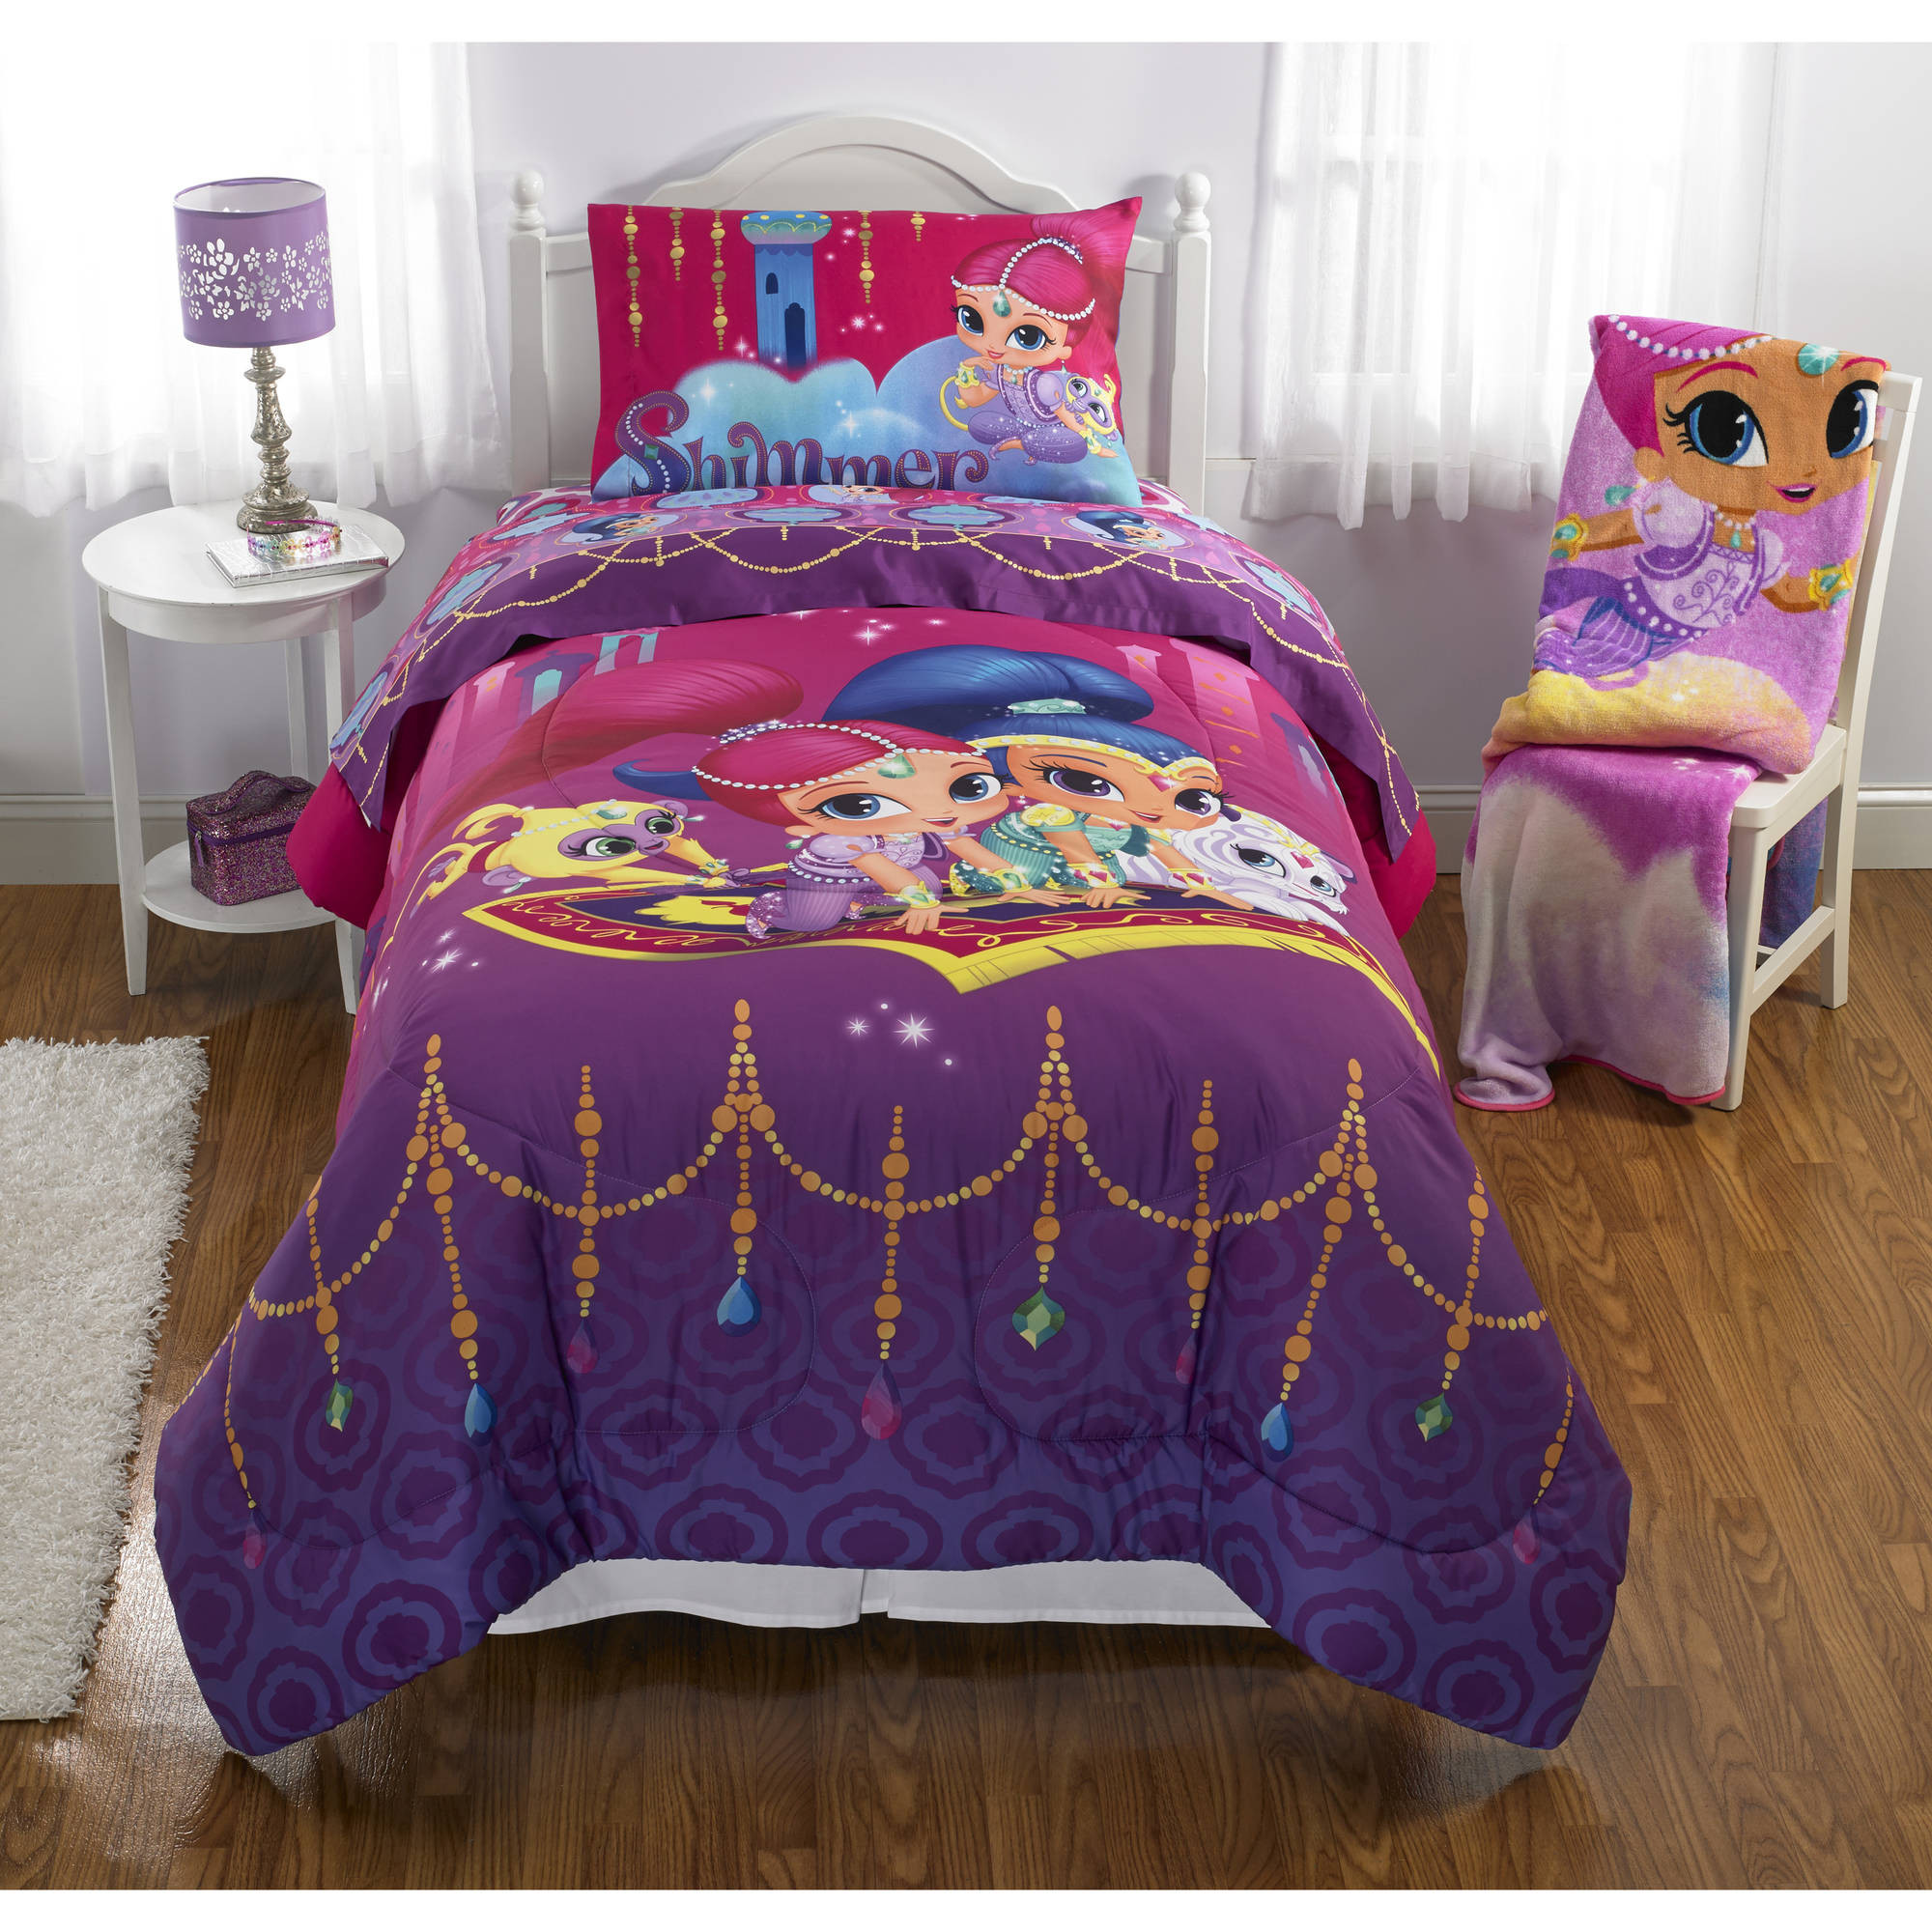 Shimmer And Shine Bedroom Decor
 Nickelodeon Shimmer and Shine Magic Wonders Reversible